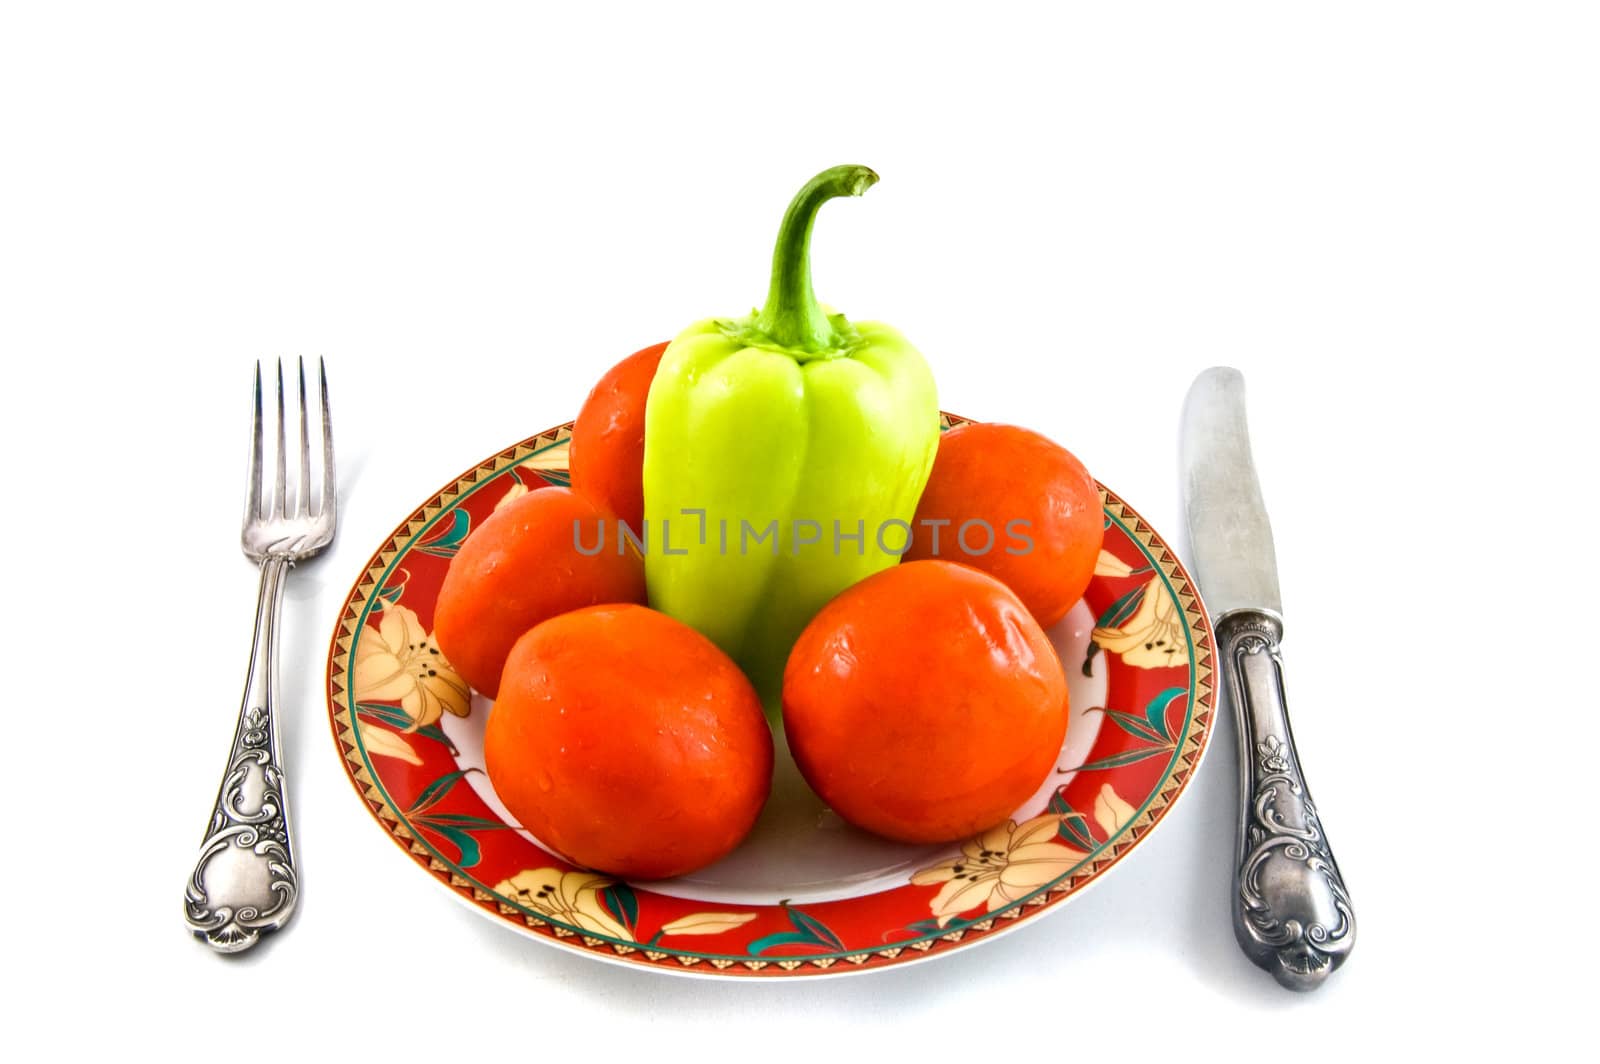 peppers and tomatoes on plate on white bacground by galcka